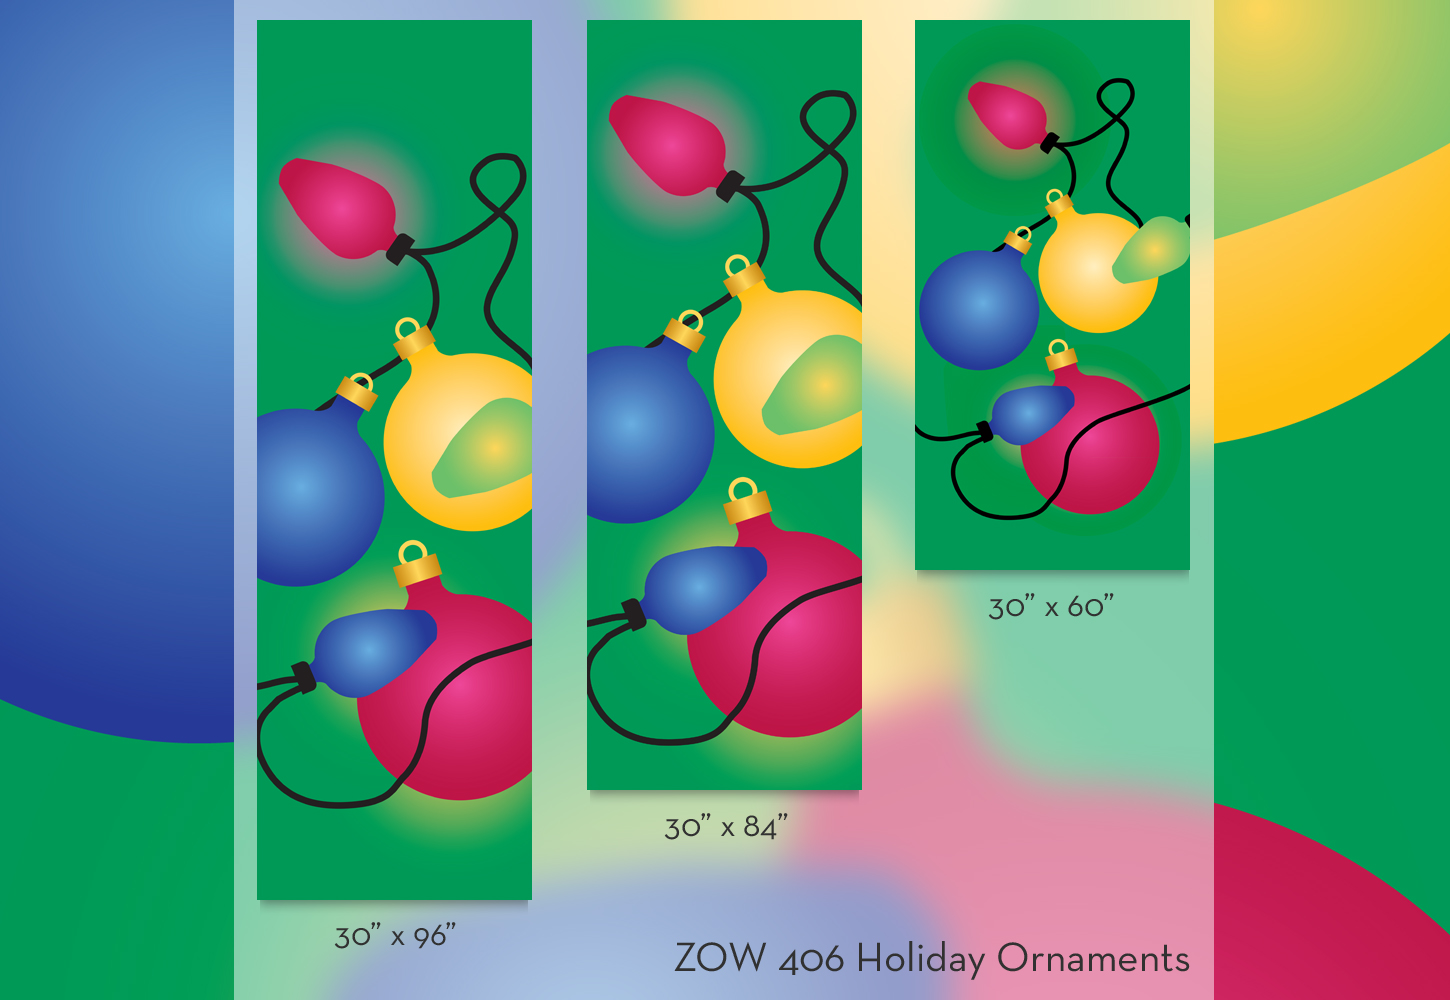 ZOW 406 Holiday Ornaments